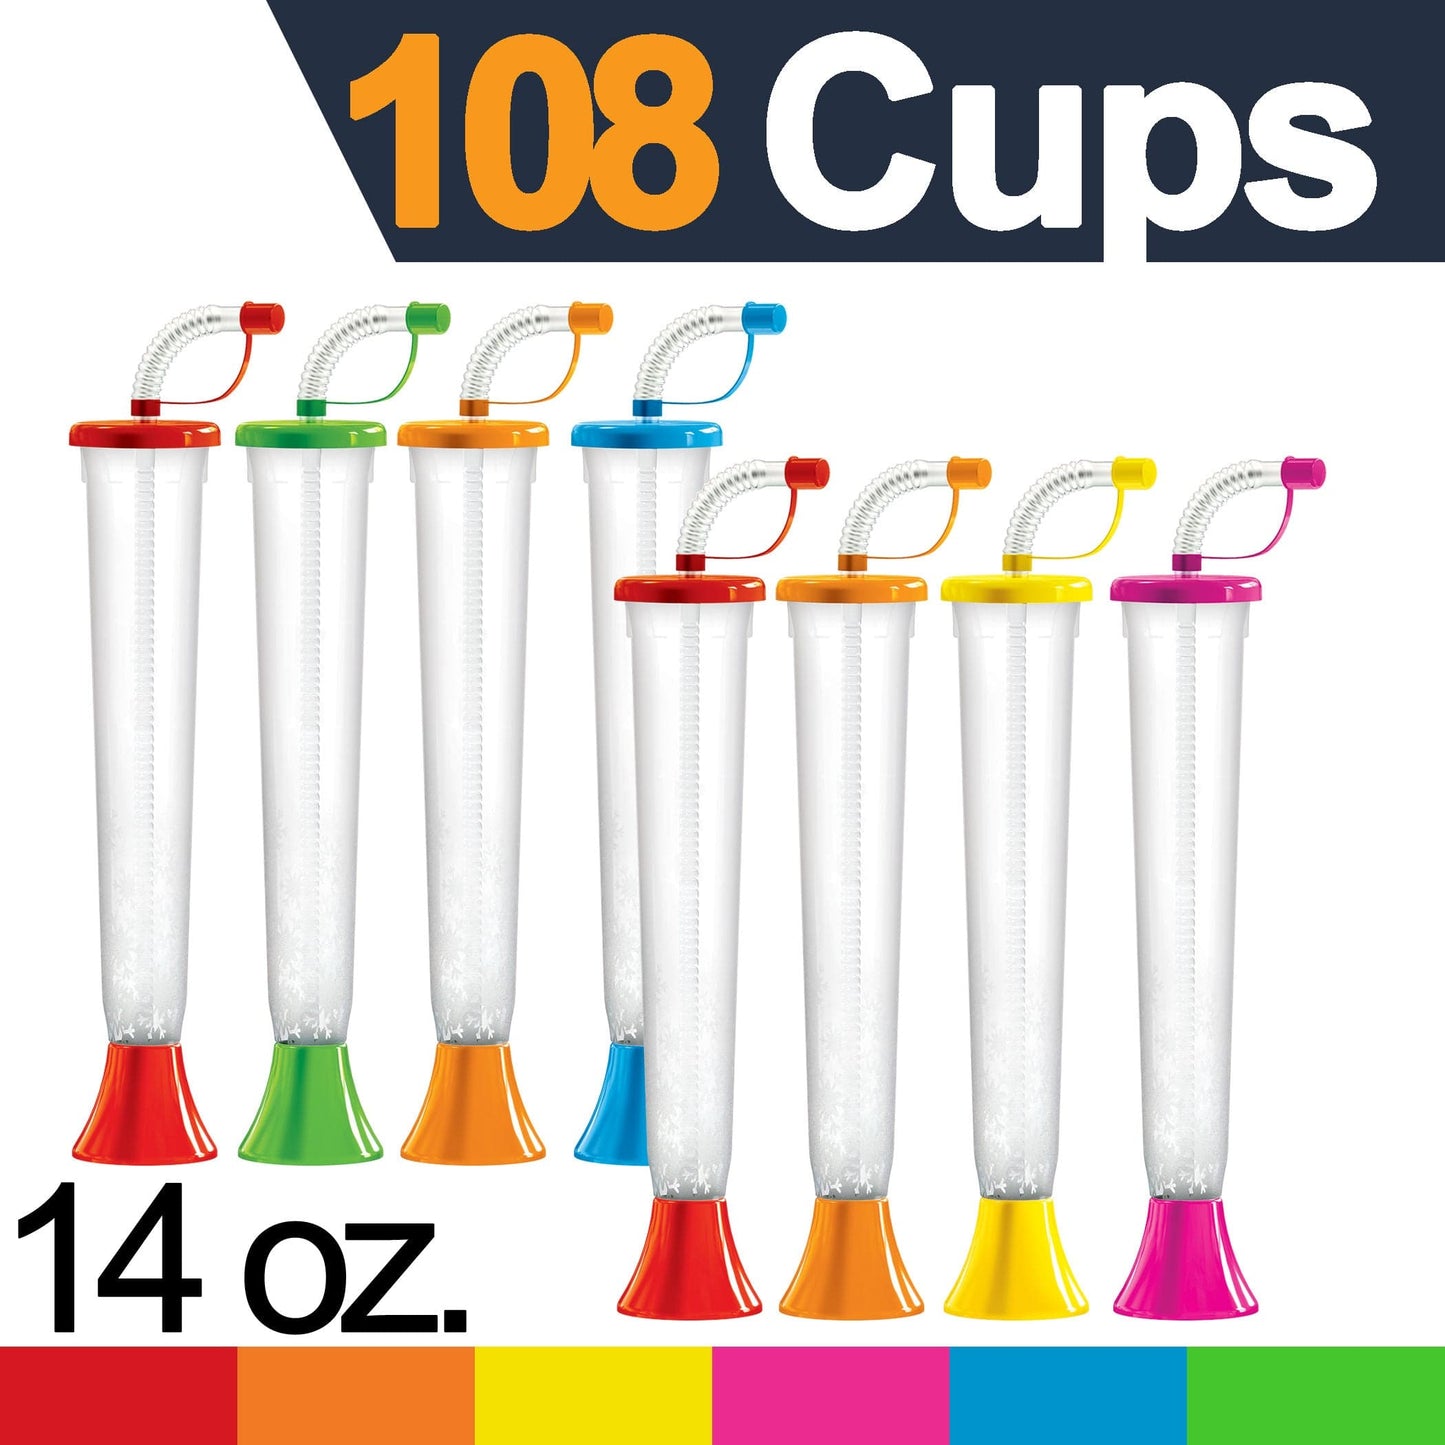 Sweet World USA Yard Cups (108 Cups) Yard Cups Variety Pack - 14oz - for Margaritas, Cold and Frozen Drinks - Red, Orange, Yellow, Pink, Blue and Lime Lids and Straws cups with lids and straws